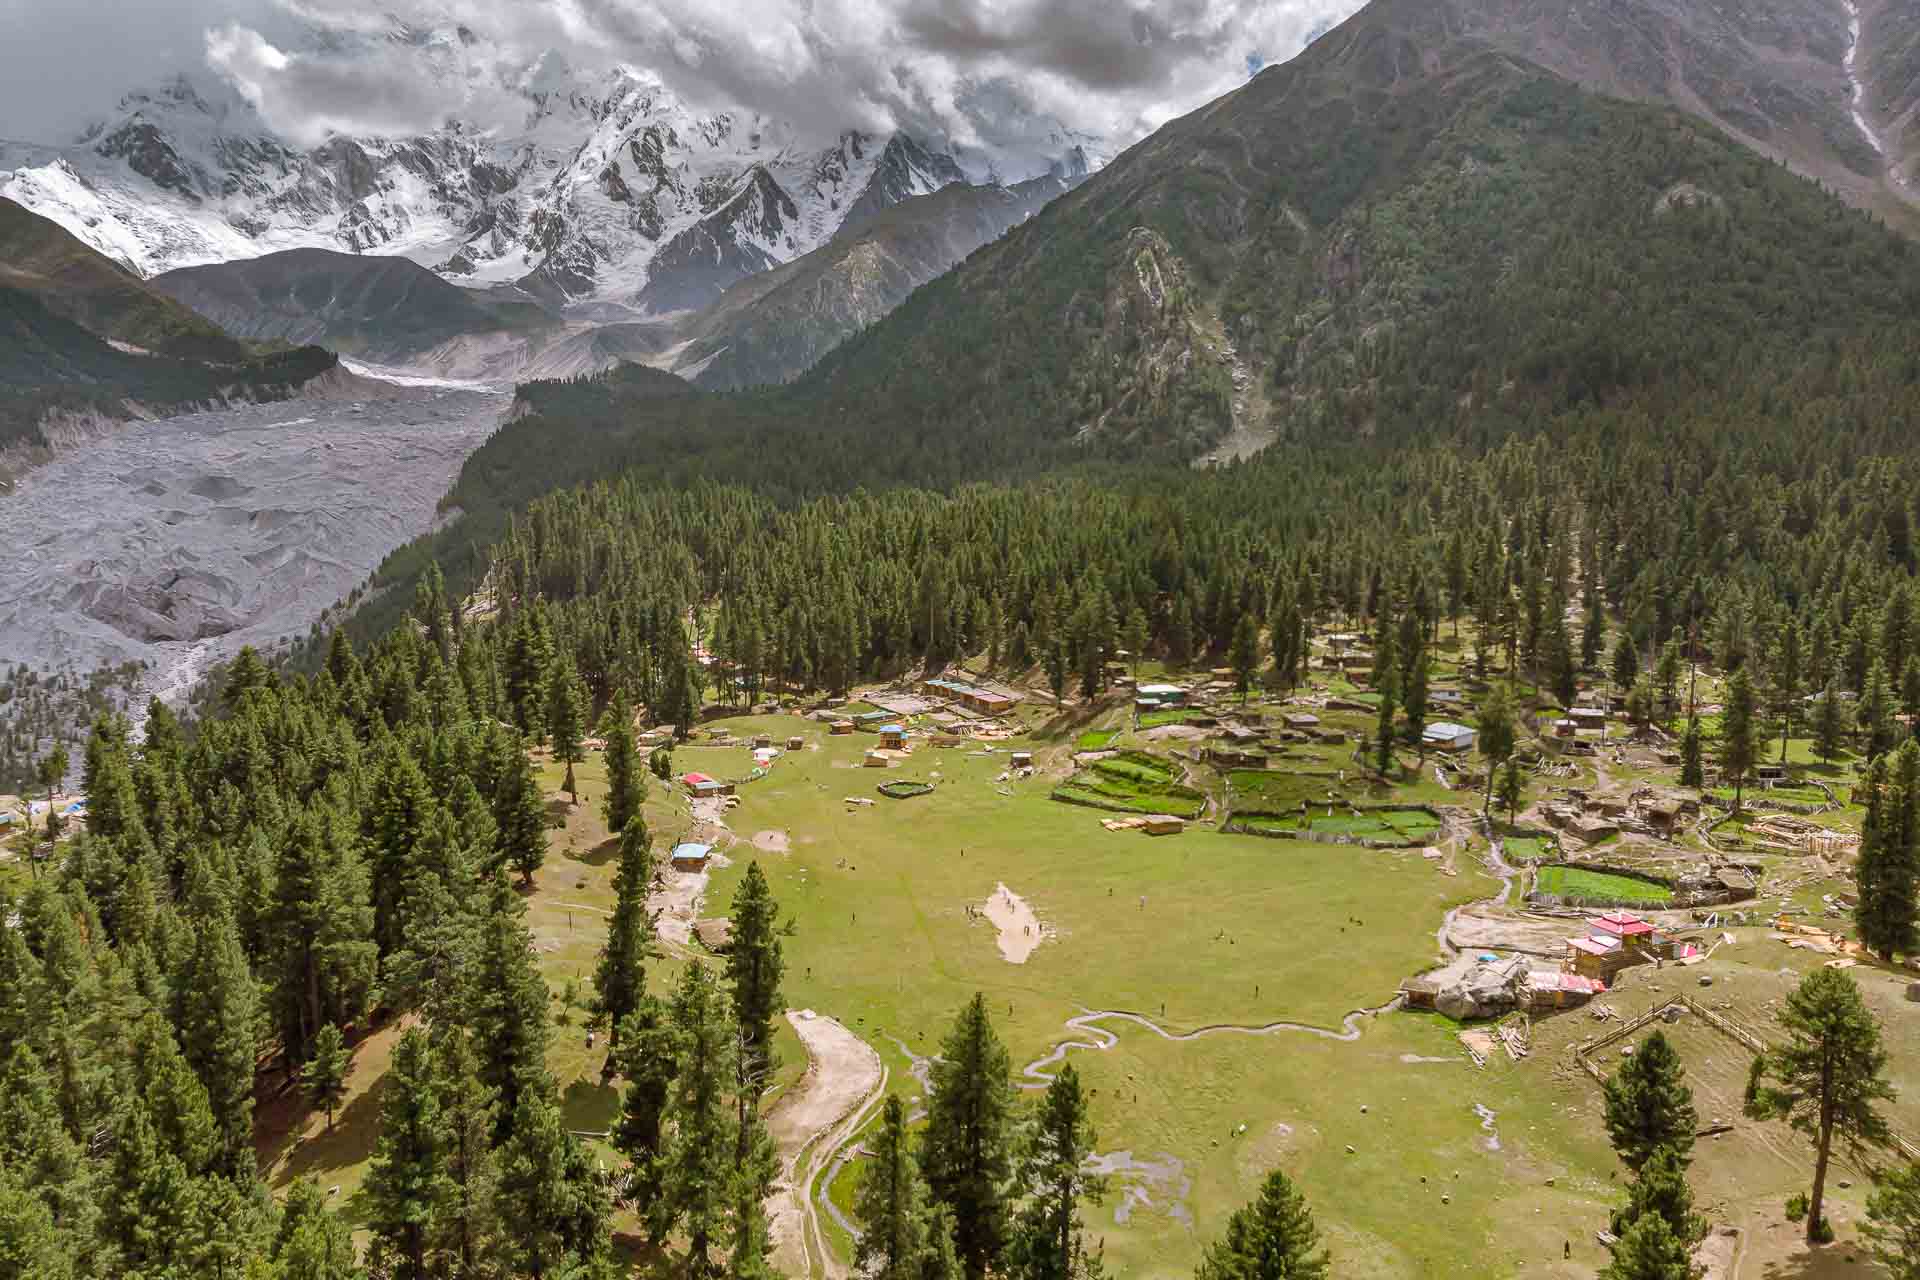 Aerial view of the village in Fairy Meadows and the Naga Parbat mountain in the back